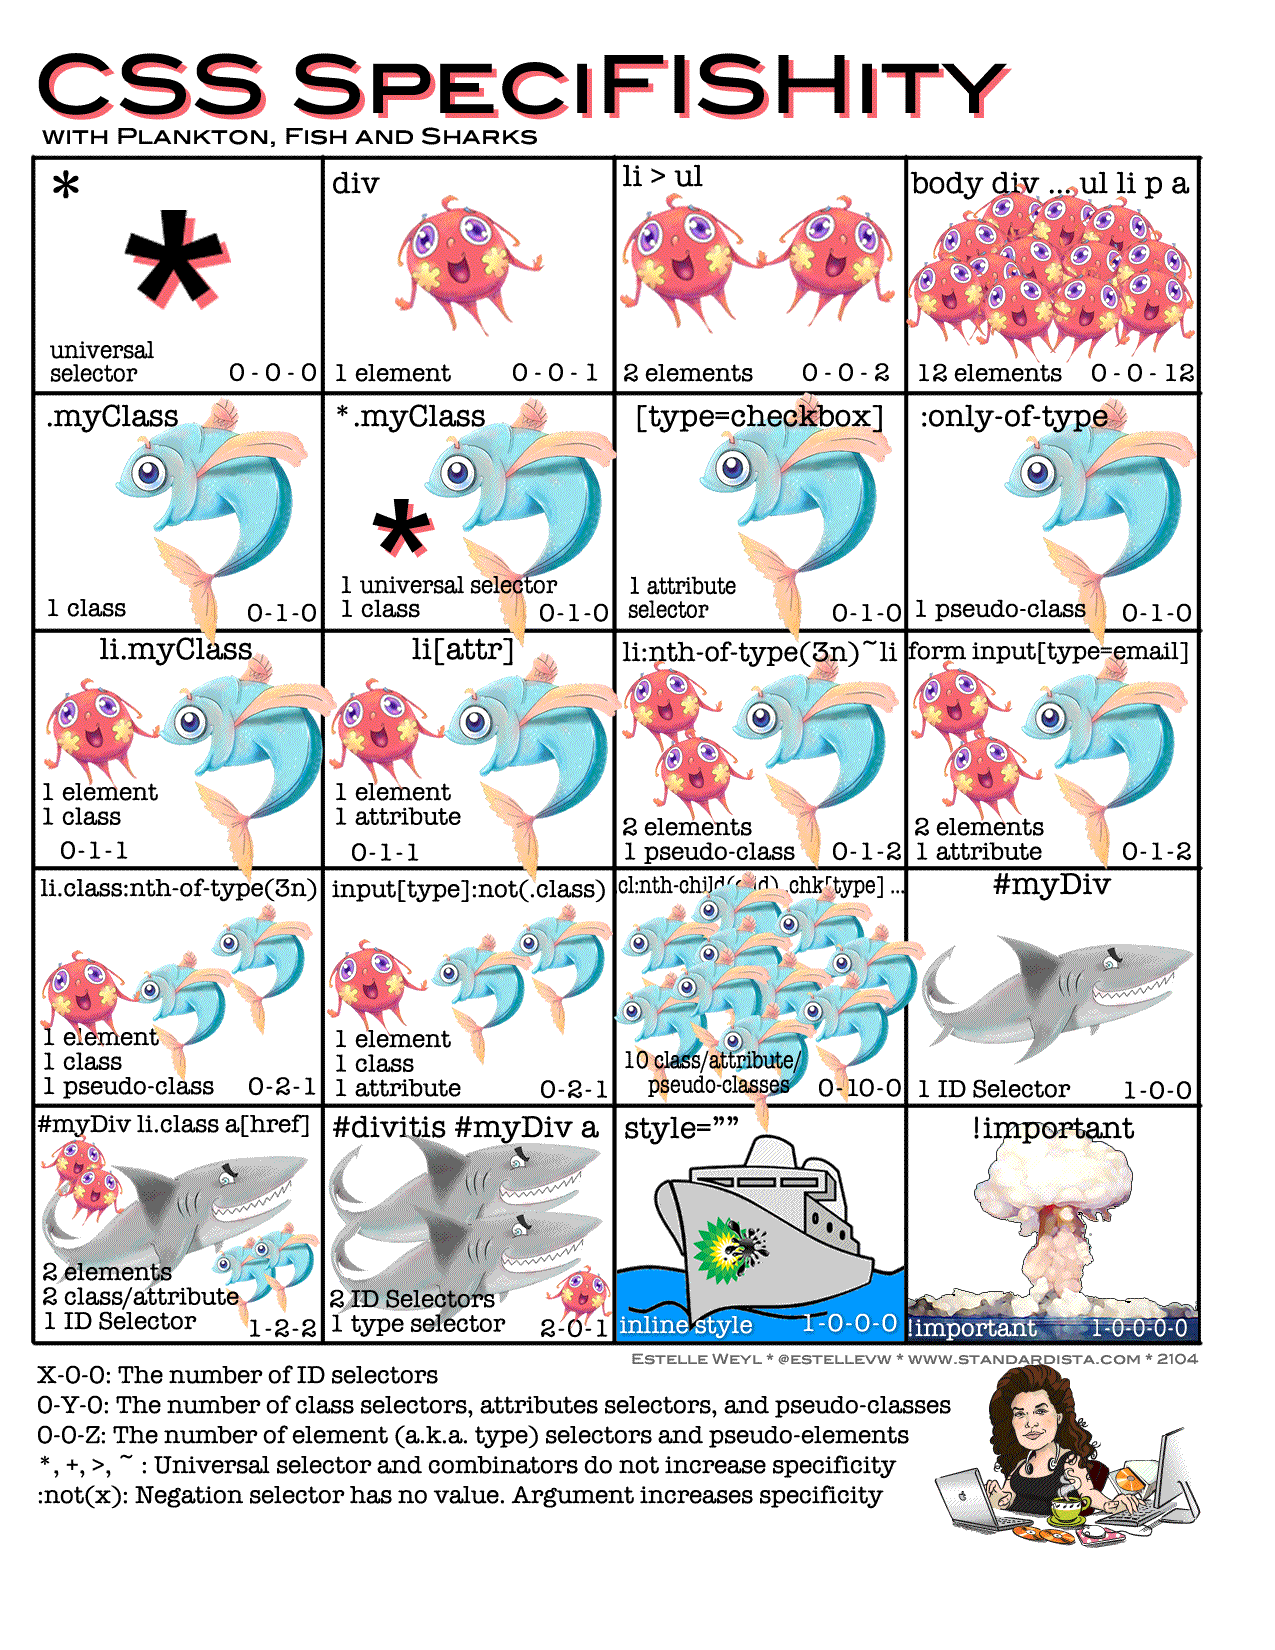 specifishity chart